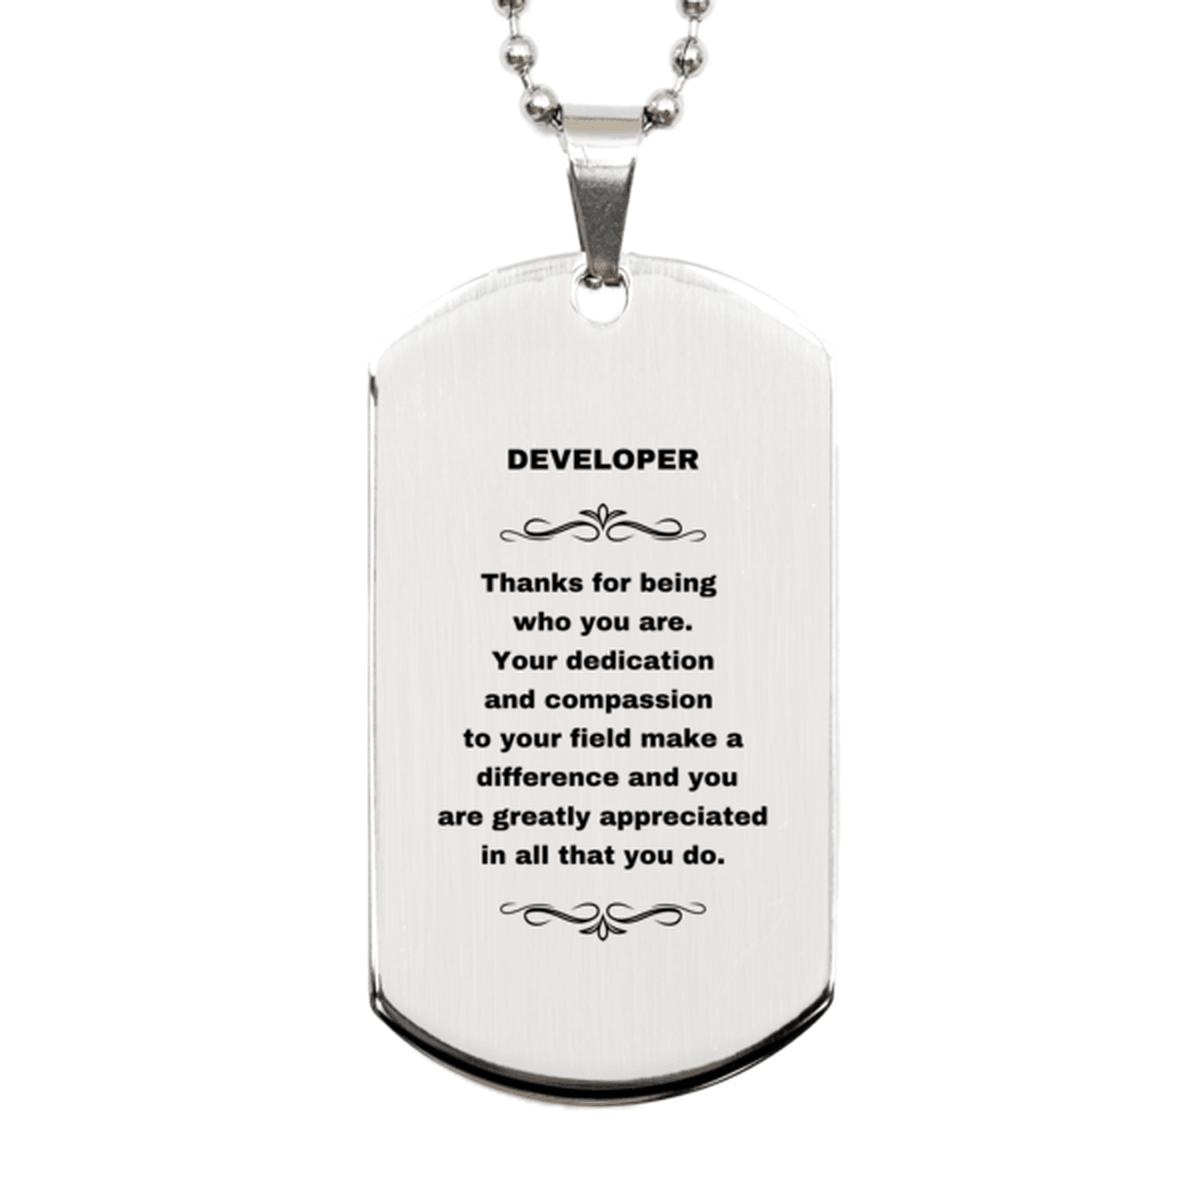 Developer Silver Dog Tag Necklace Engraved Bracelet - Thanks for being who you are - Birthday Christmas Jewelry Gifts Coworkers Colleague Boss - Mallard Moon Gift Shop